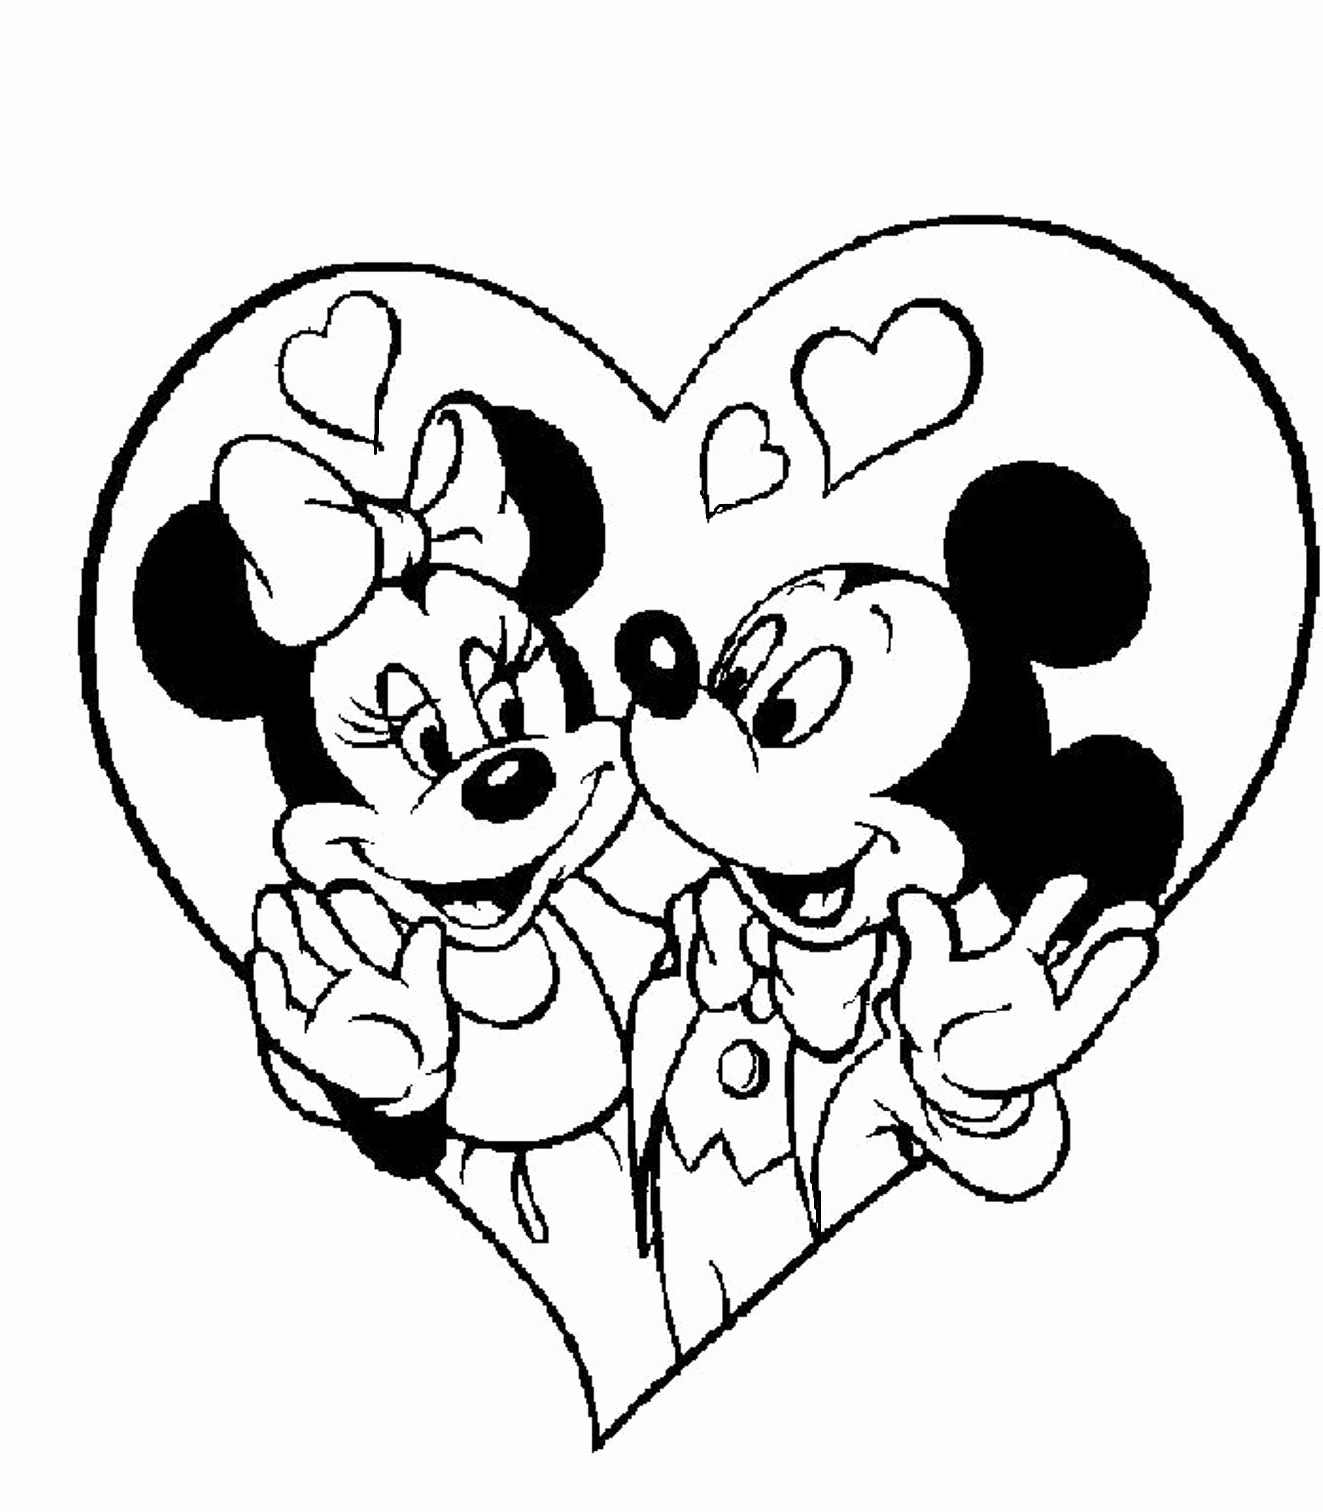 Mickey Mouse Valentines Day Coloring Pages At Getcolorings | Free encequiconcerne Coloriage Mini Mickey